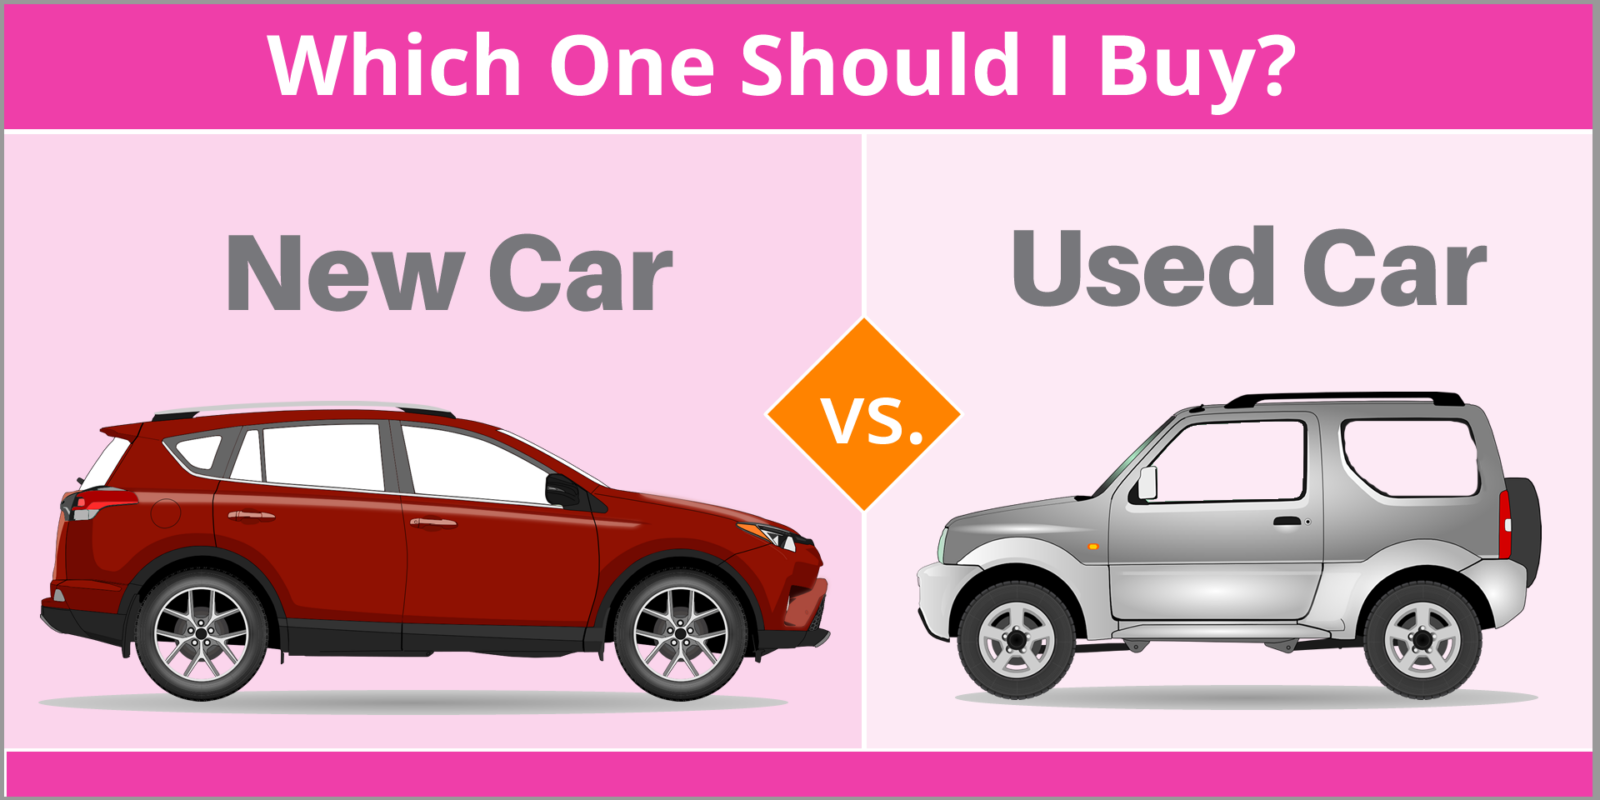 Should I buy a new car or a used car